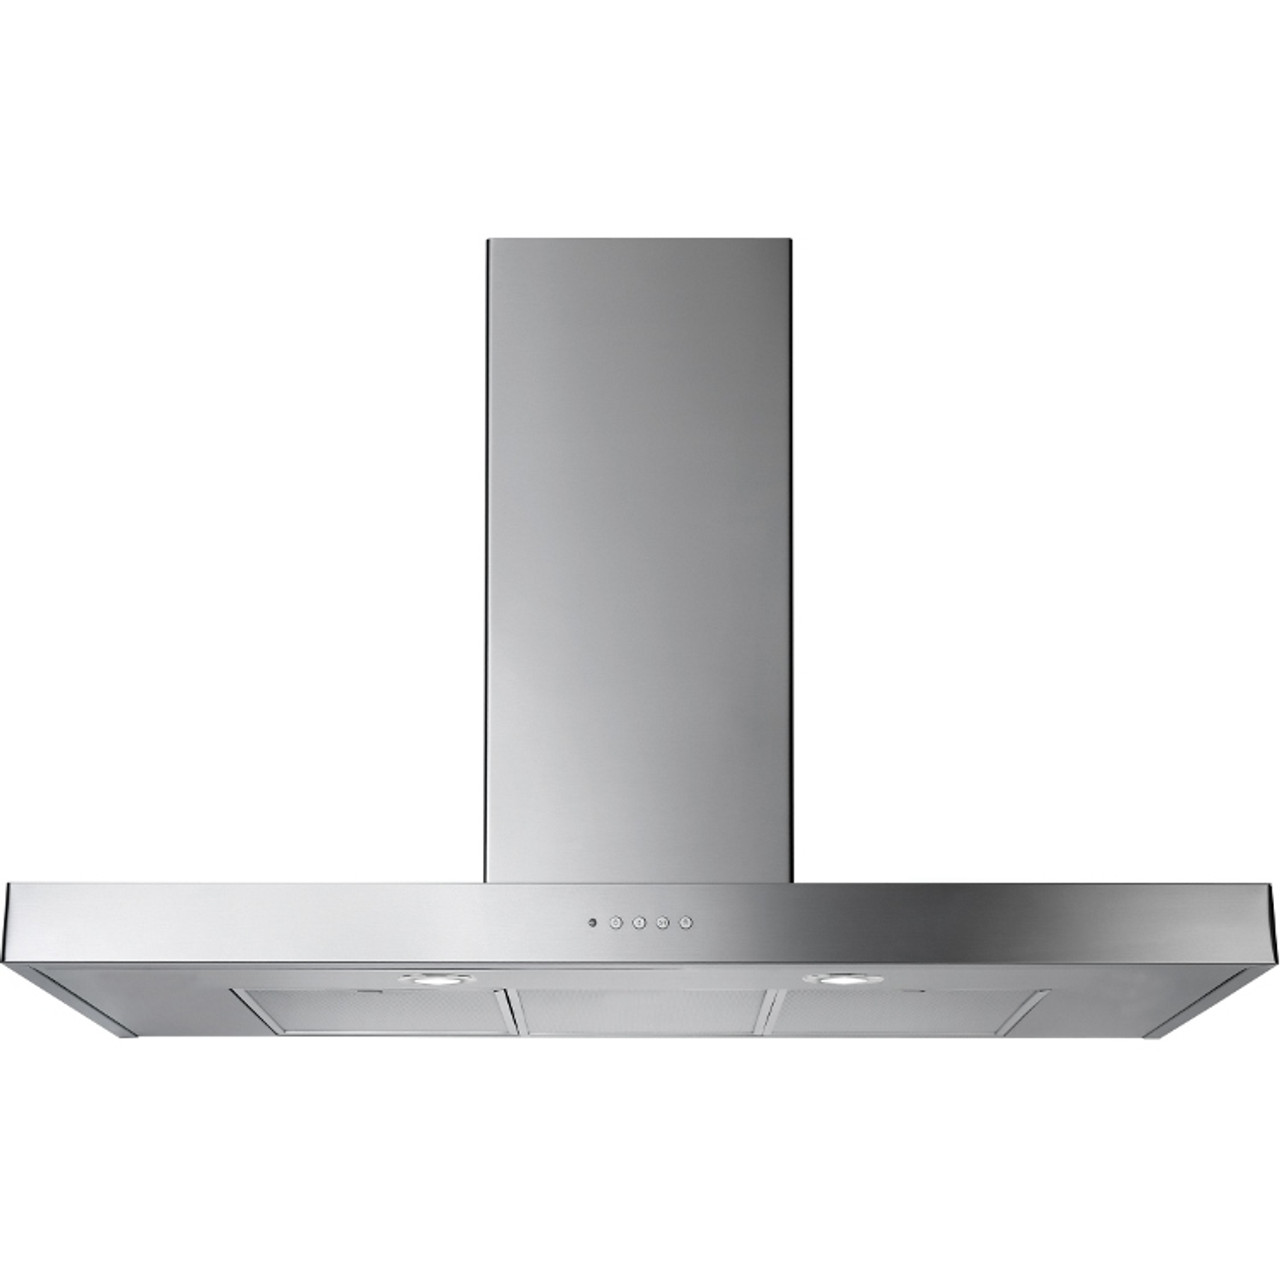 FALHDS110SS -110cm Infusion Canopy Rangehood - Stainless Steel